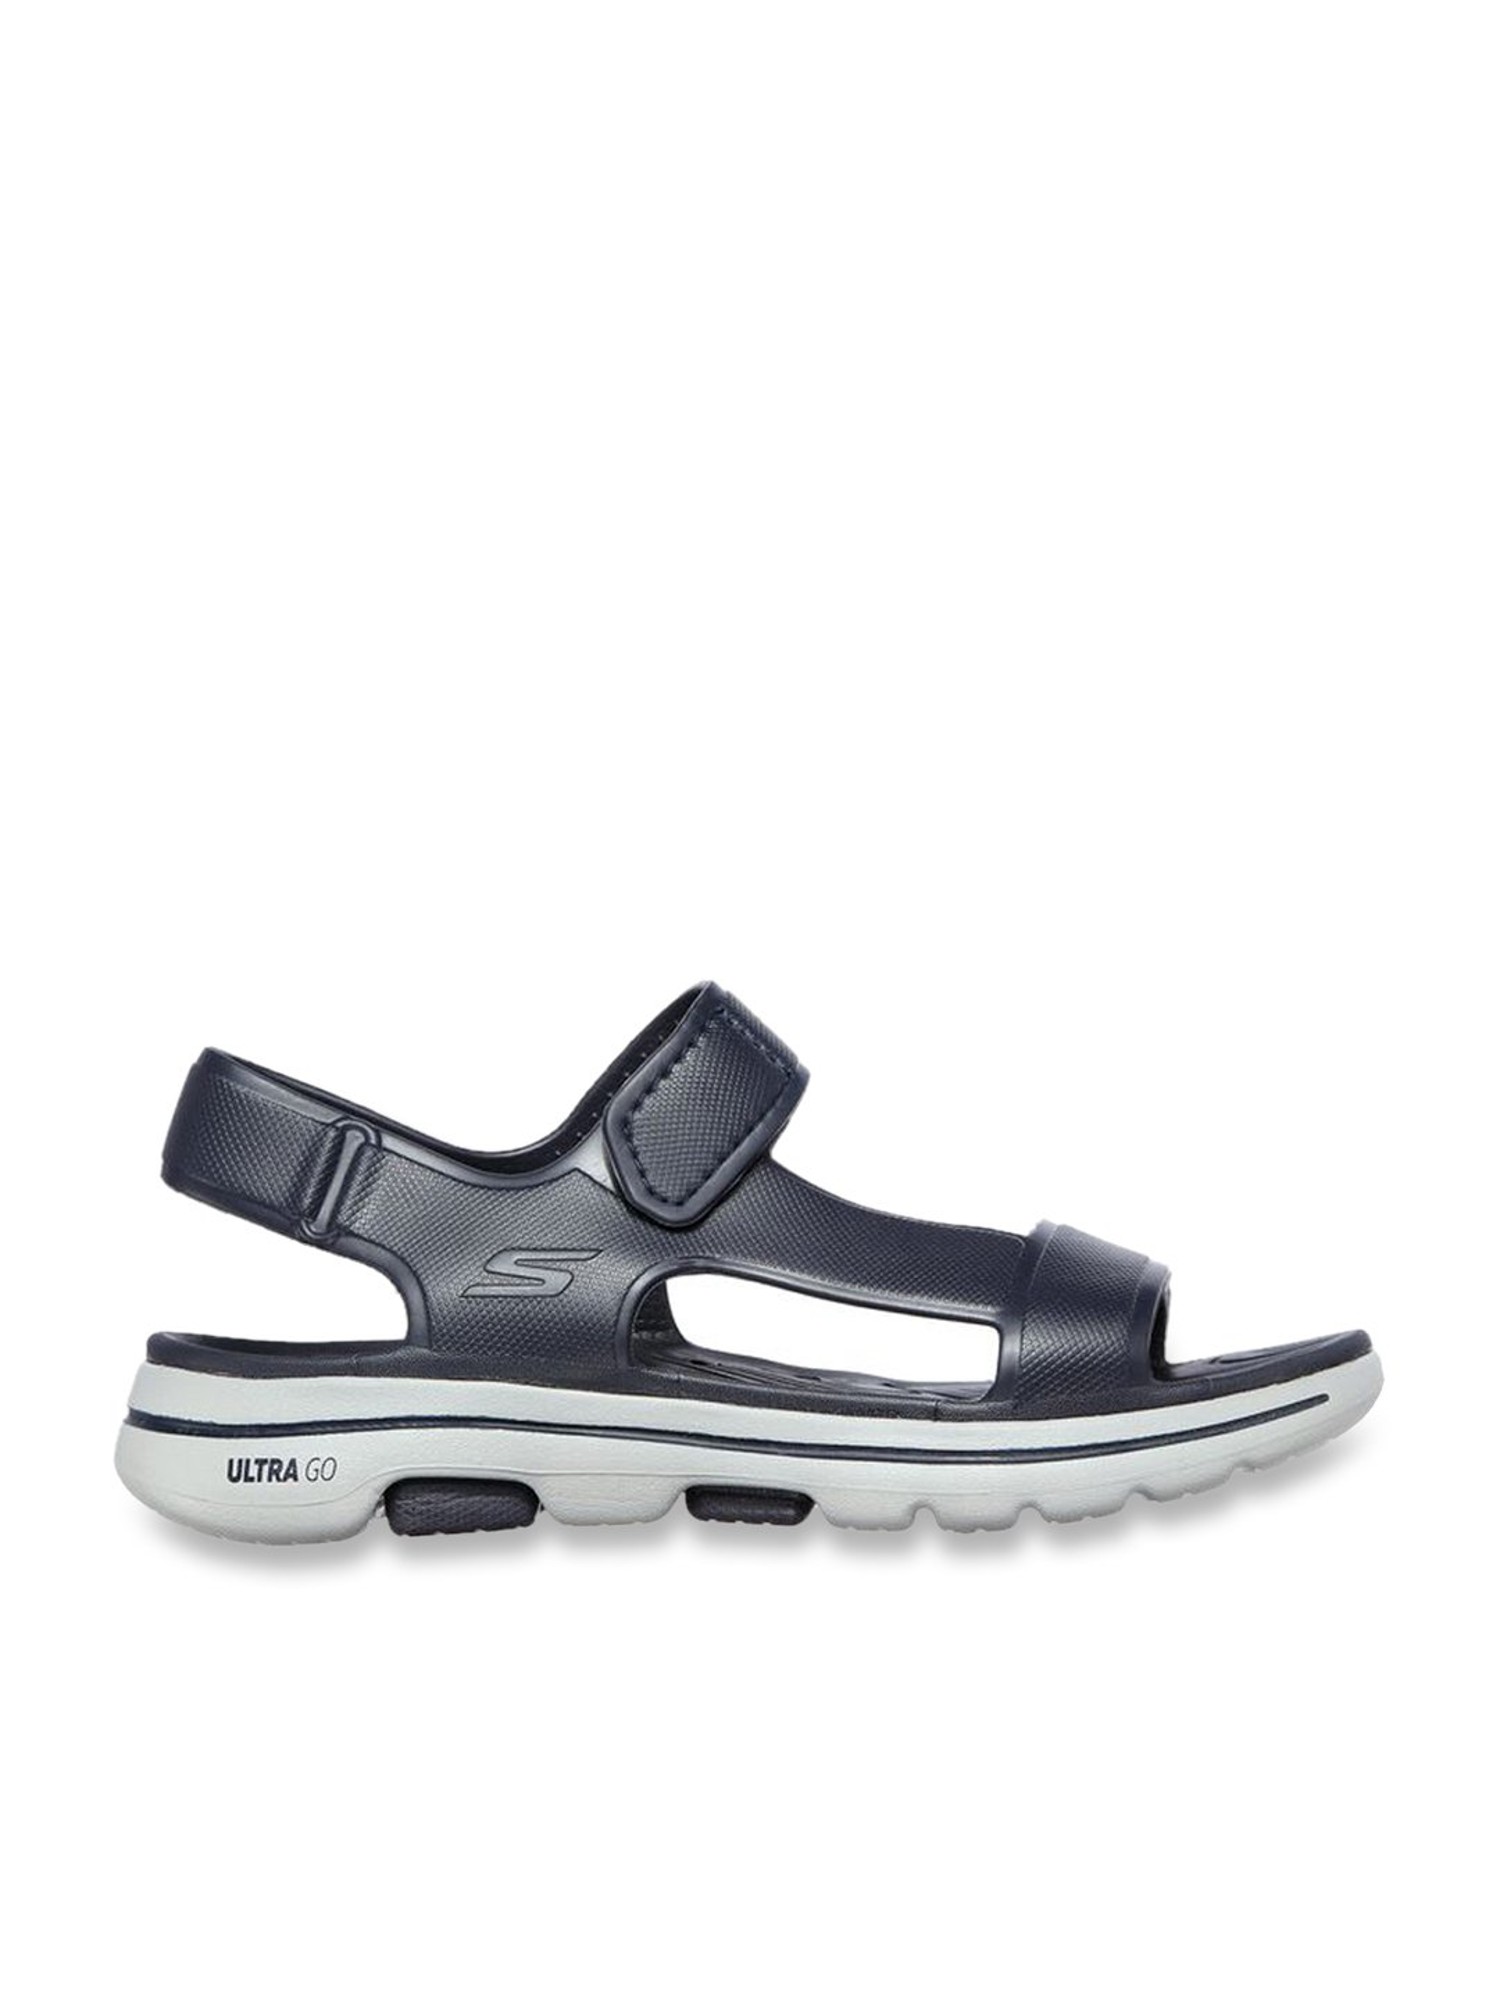 Buy SKECHERS Go Walk Arch Fit - Missi Synthetic Leather Slipon Men's Sandals  | Shoppers Stop